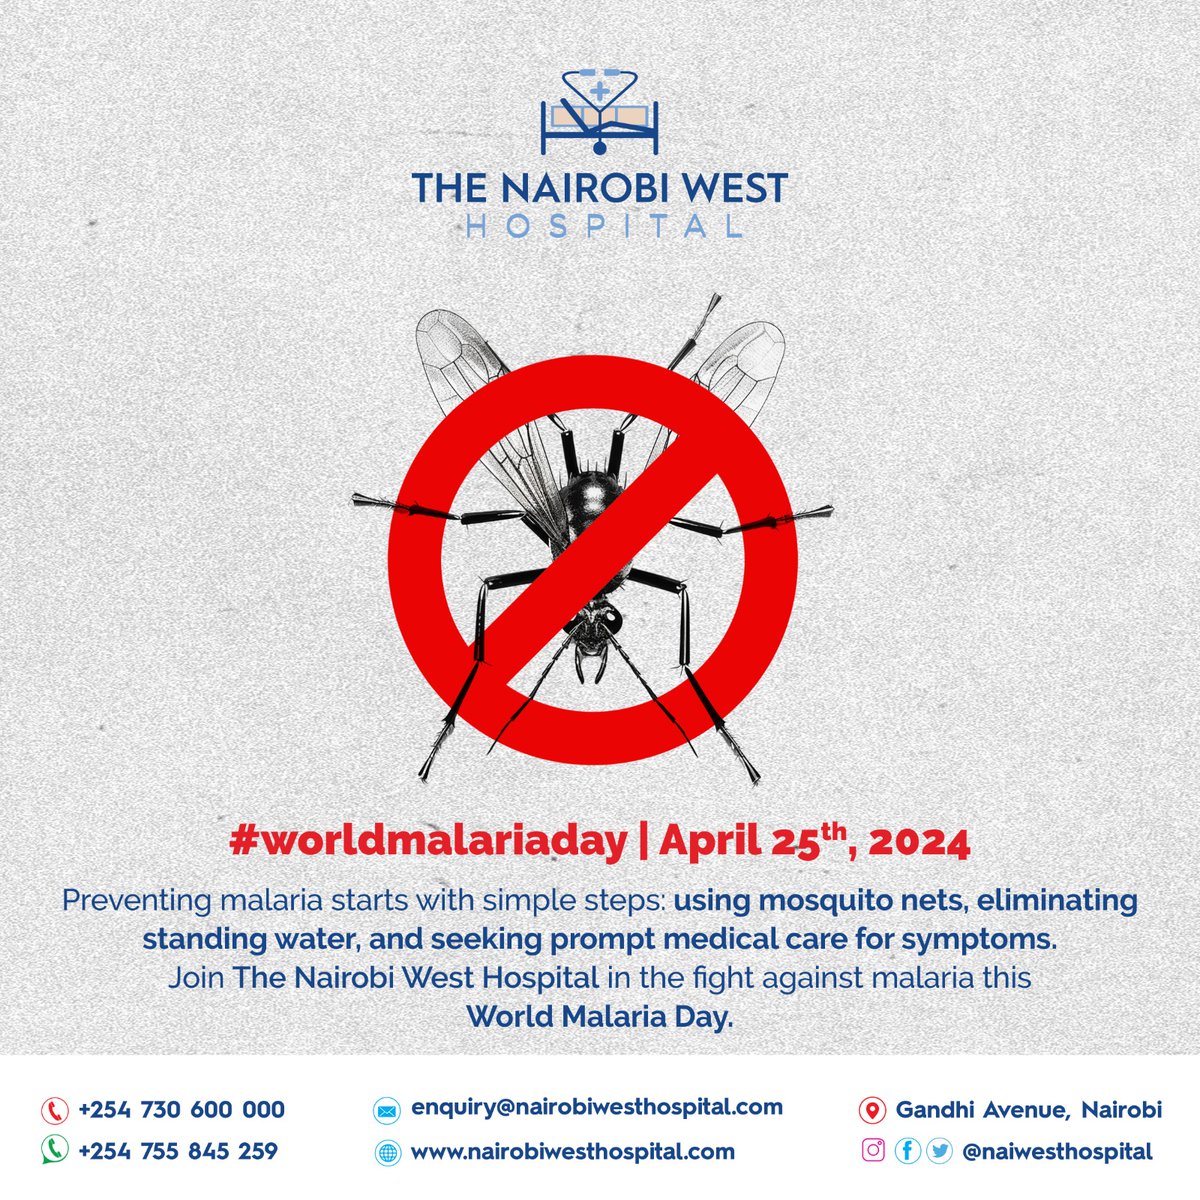 On this #WorldMalariaDay2024, The Nairobi West Hospital stands united in the global fight against malaria. Preventing malaria starts with simple steps: using mosquito nets, eliminating standing water, & seeking prompt medical care for symptoms. Together we can end Malaria.